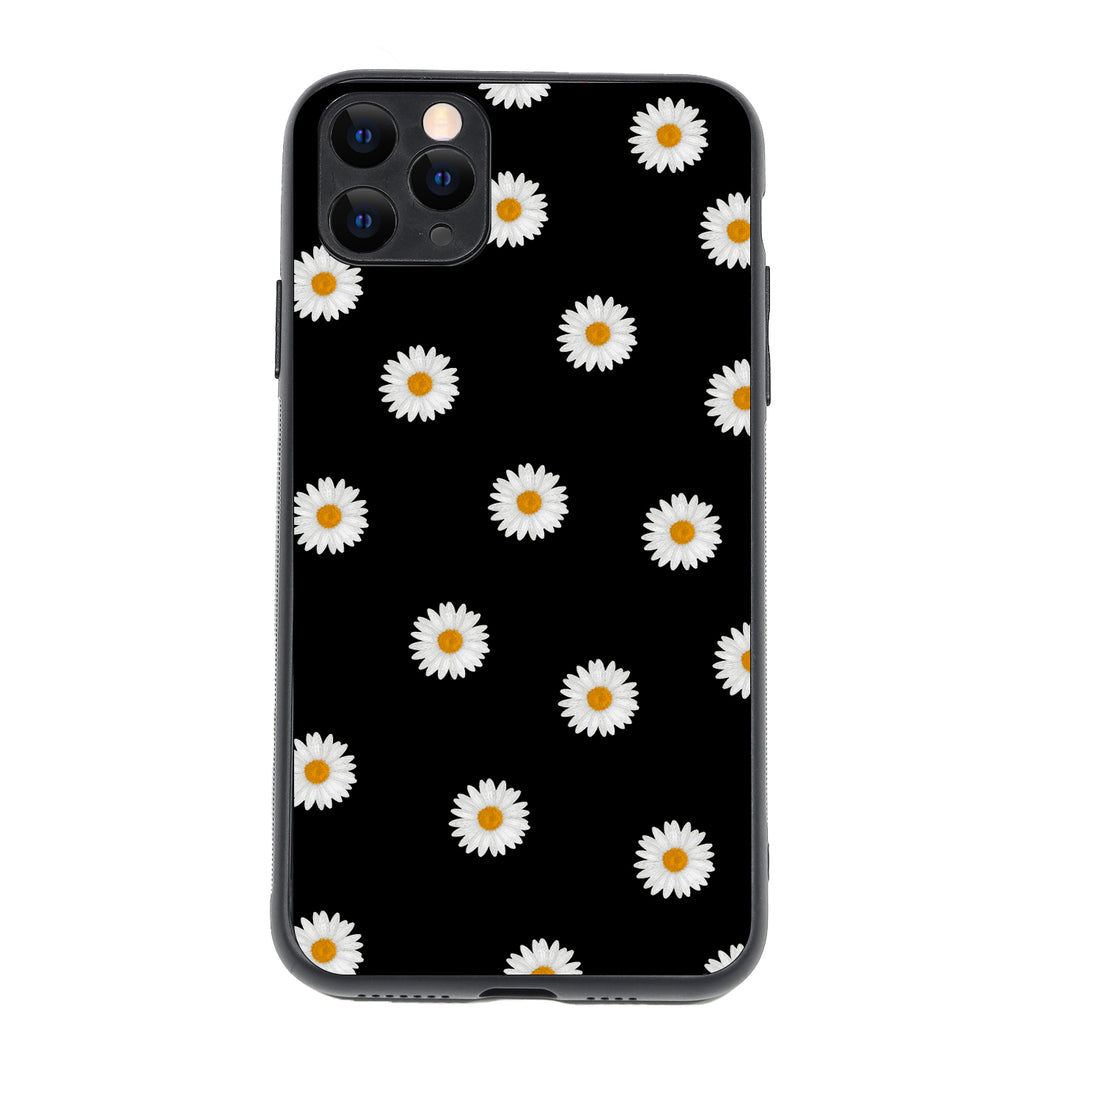 White Sunflower Floral iPhone 11 Pro Max Case